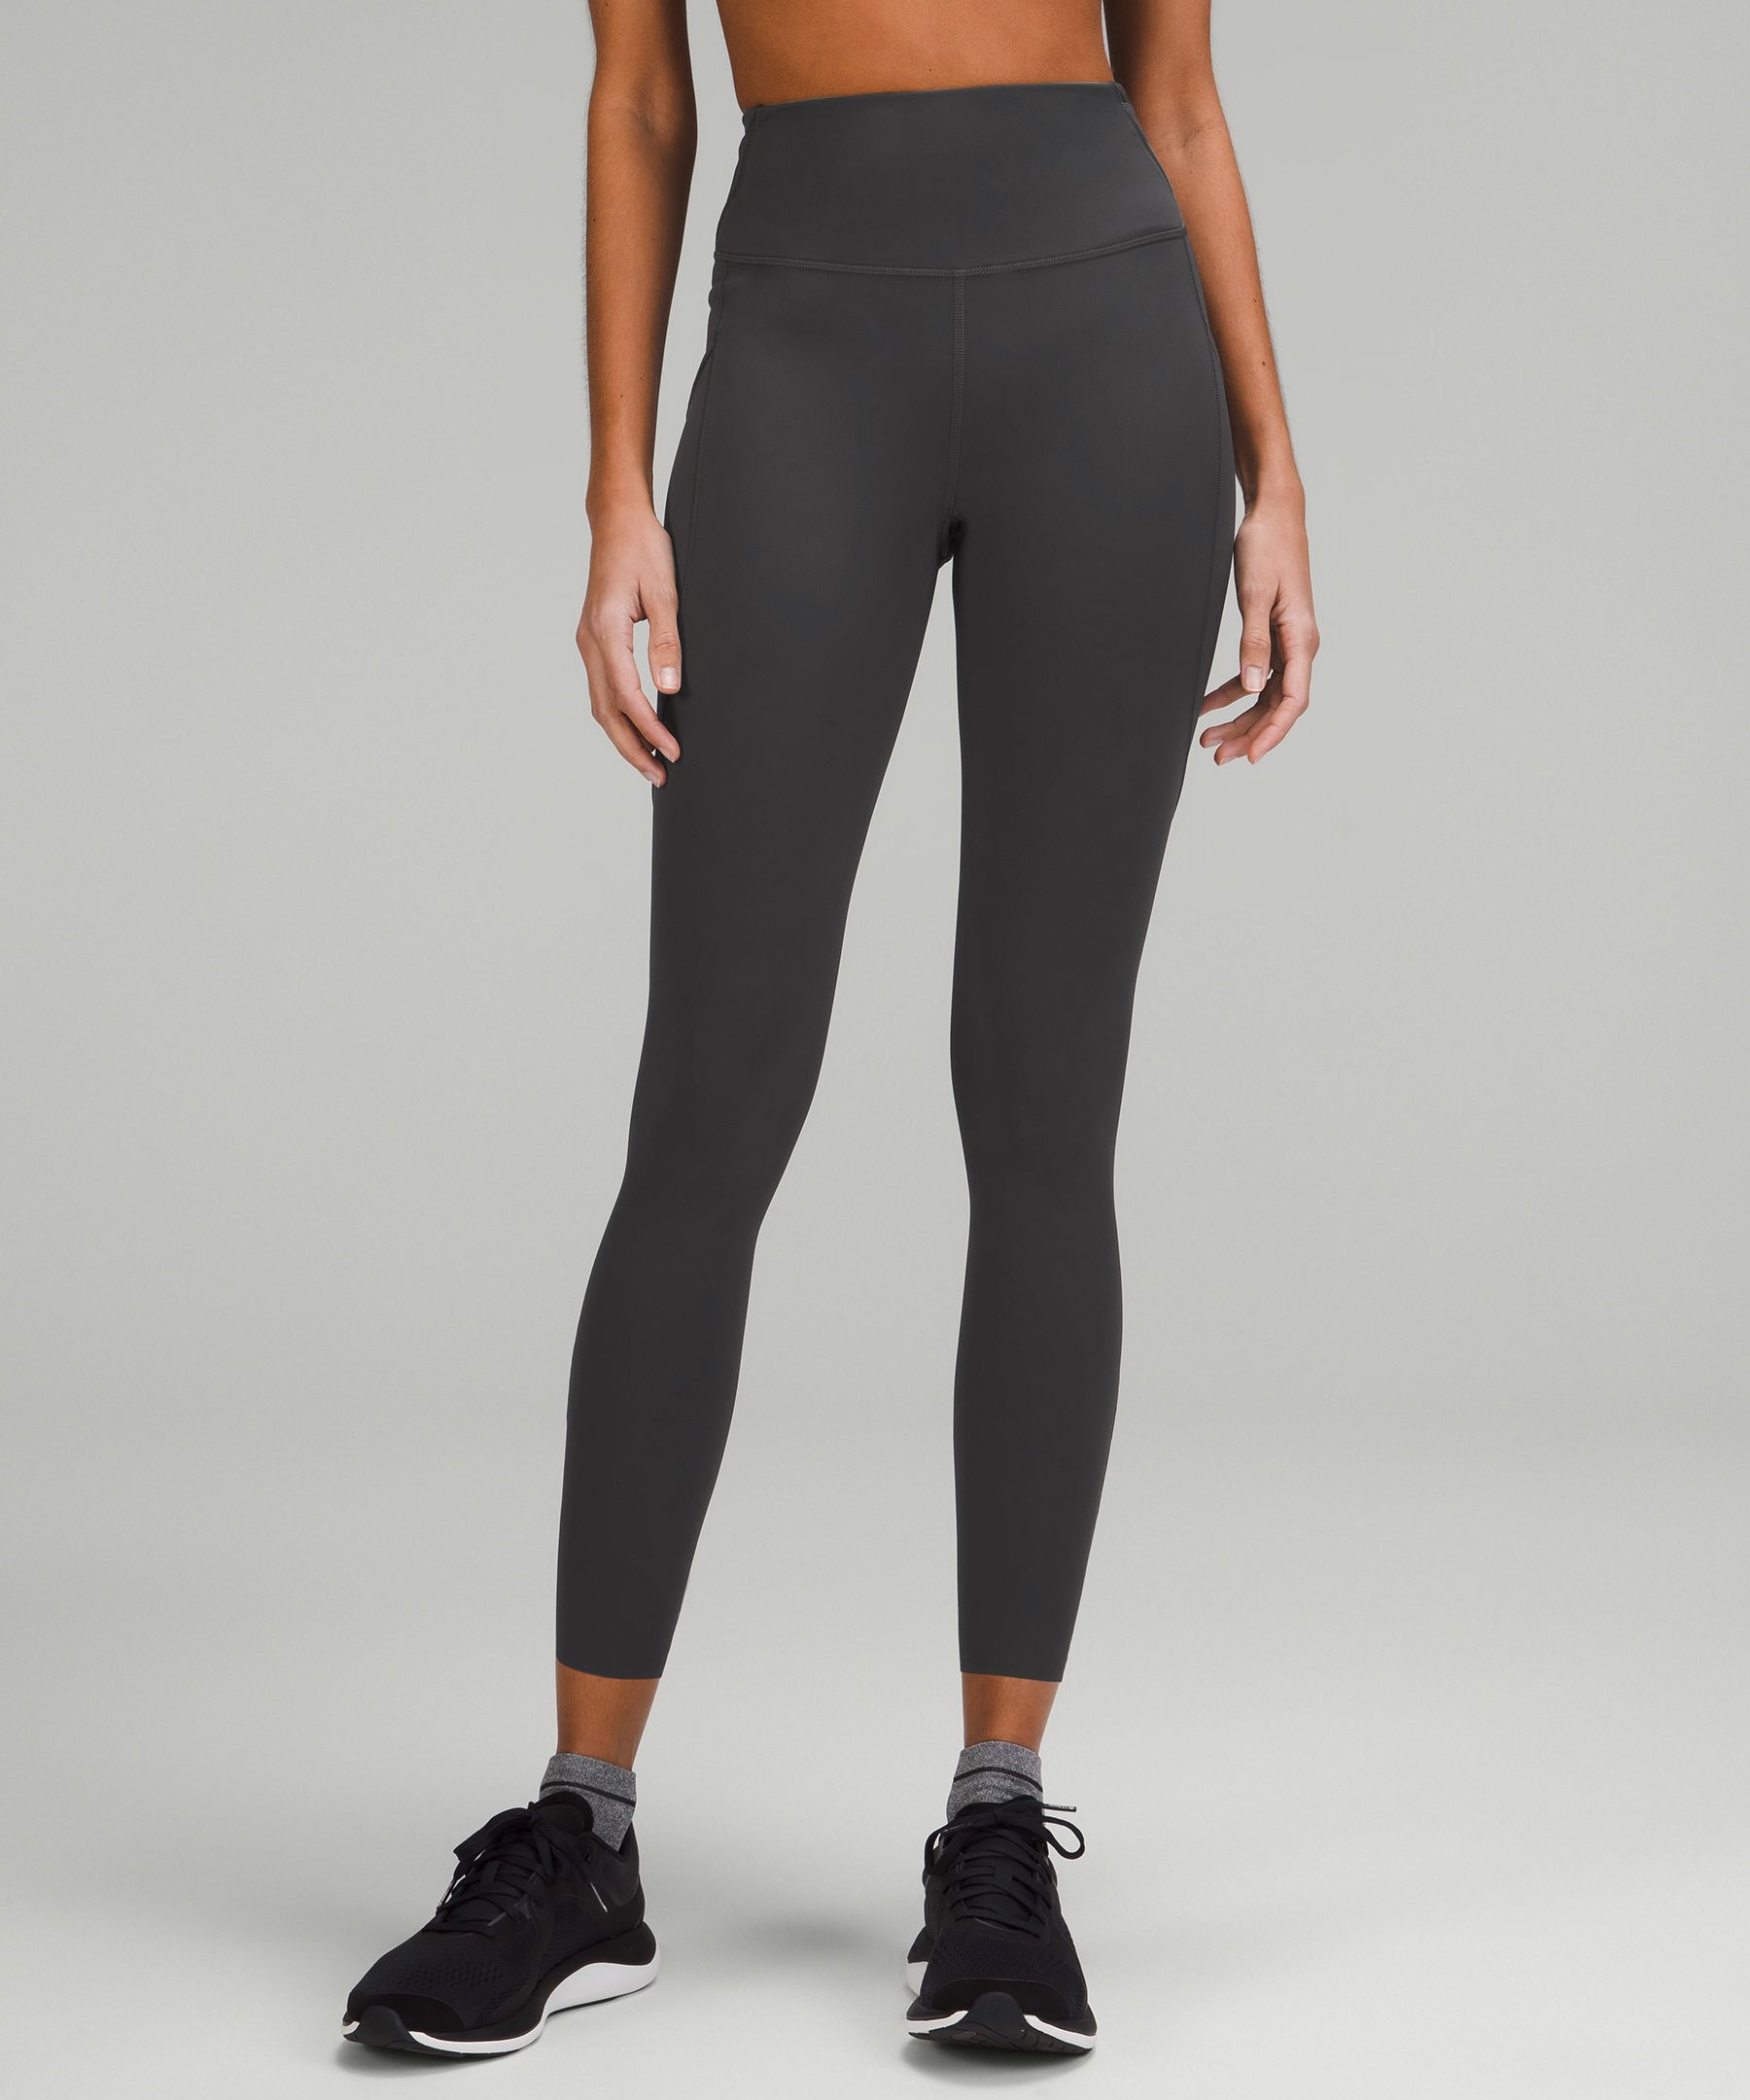 Fast and Free High-Rise Tight 25, Women's Leggings/Tights, lululemon